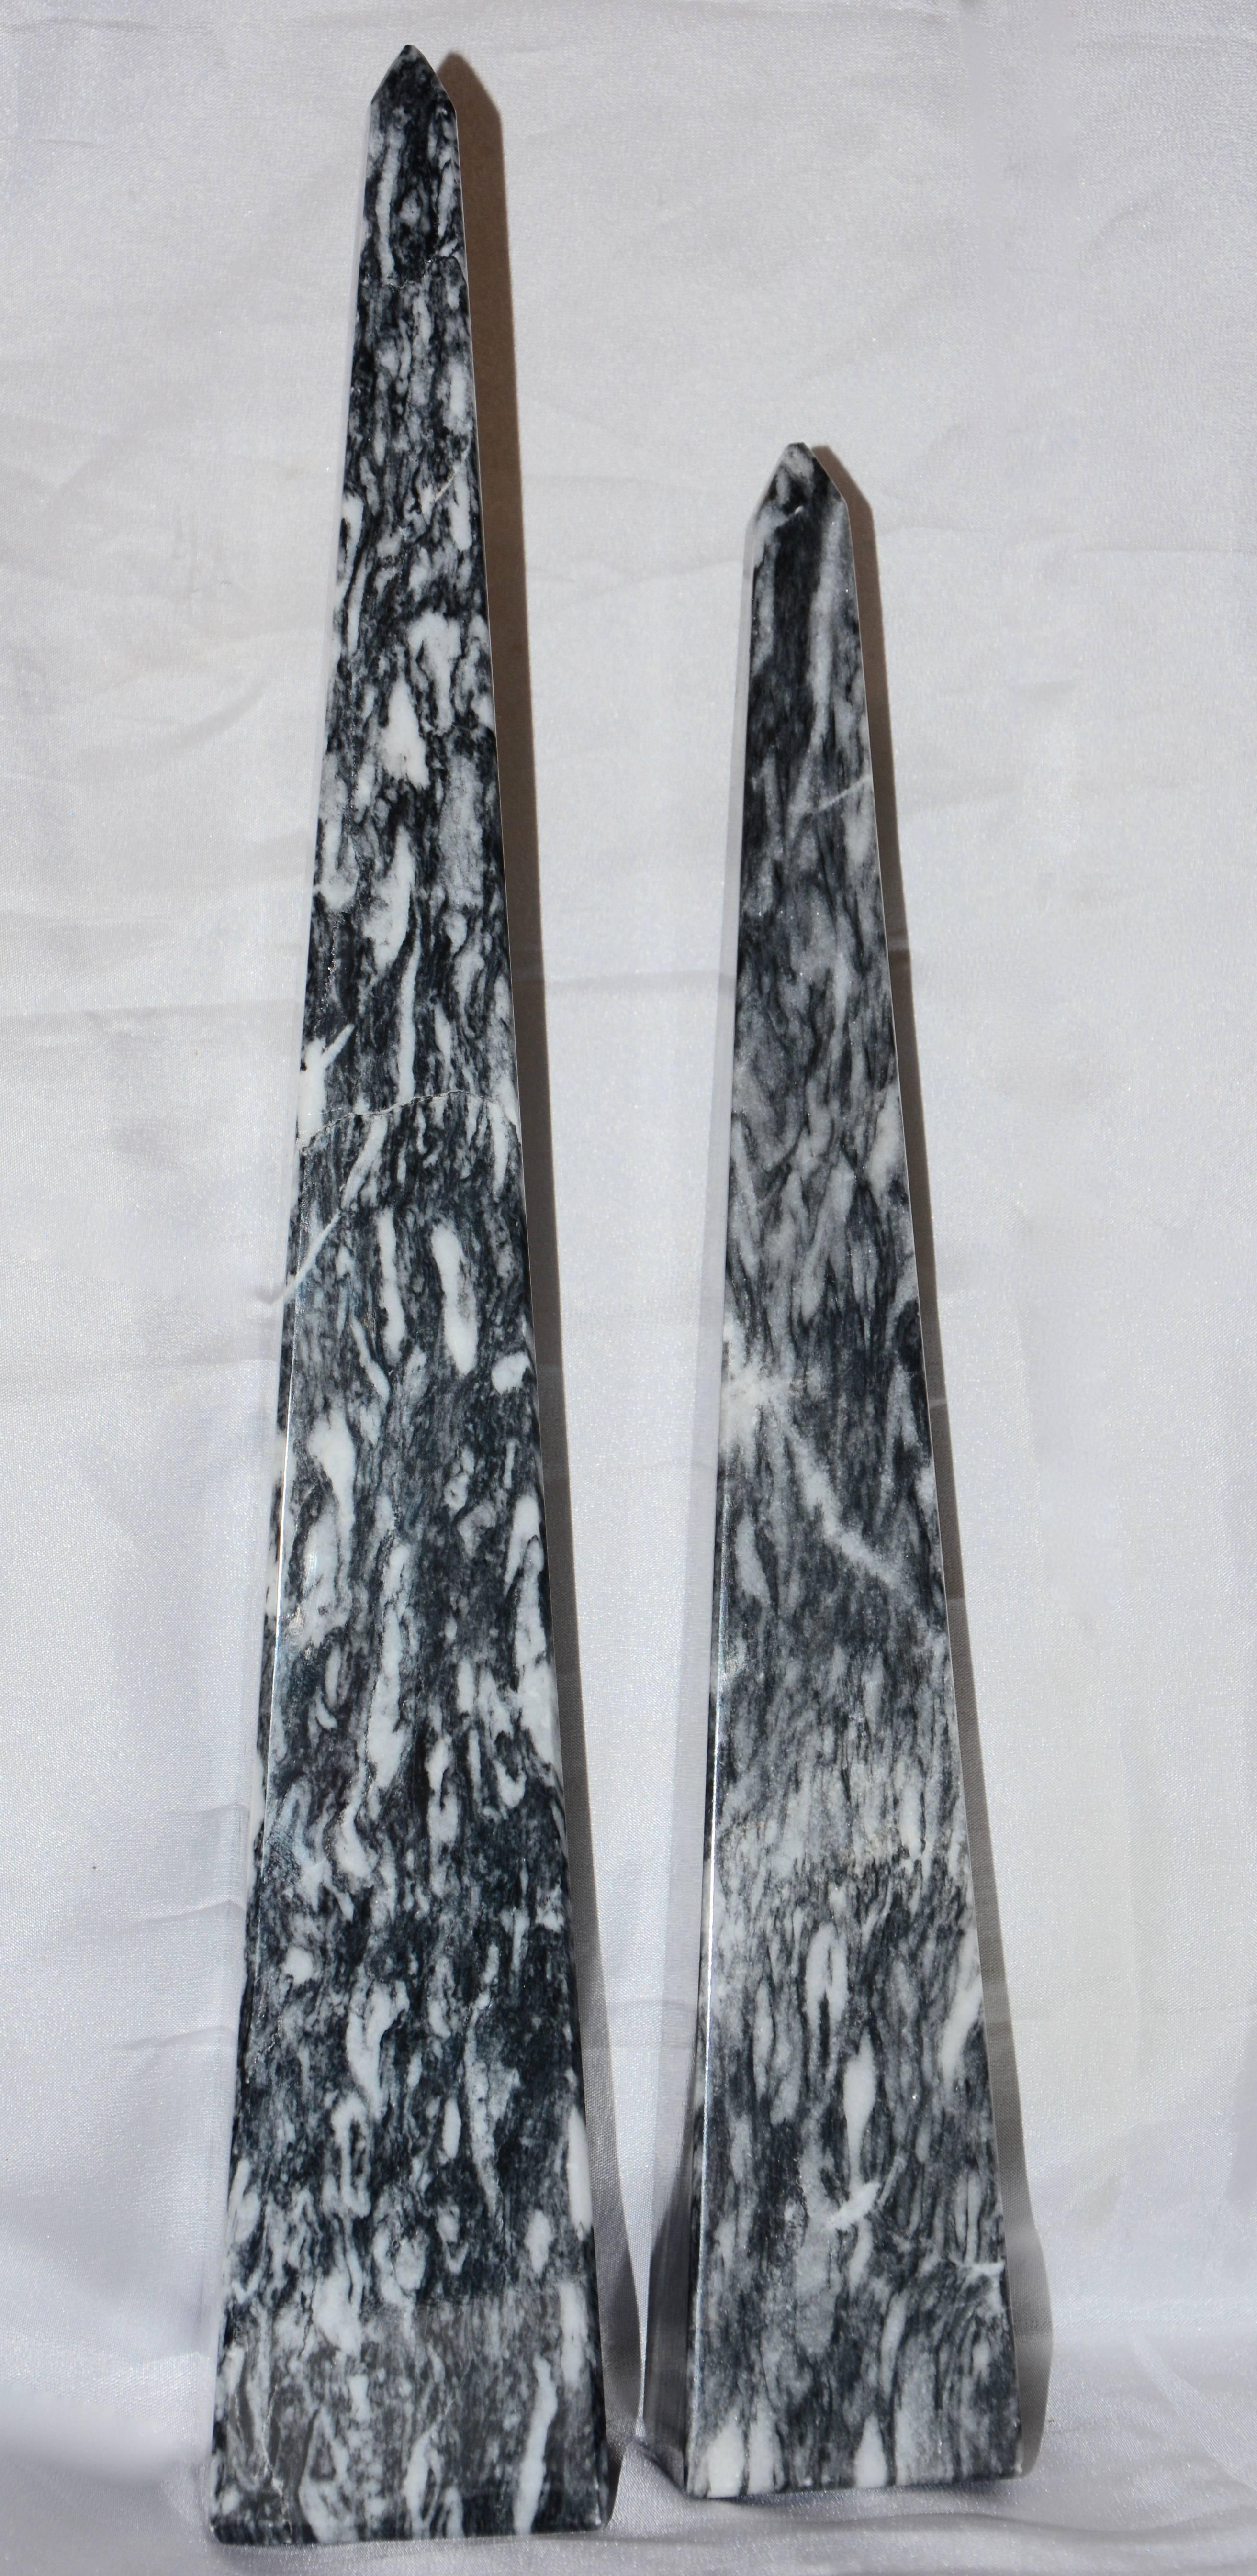 Striations of gray and white accent this pair of marble obelisks. Smooth lines are dotted with natural cracks and veining.
Measurement in the listing is for the tallest piece.
Smaller piece measures 2.19 inches x 2.19 inches x 13.25 inches tall.